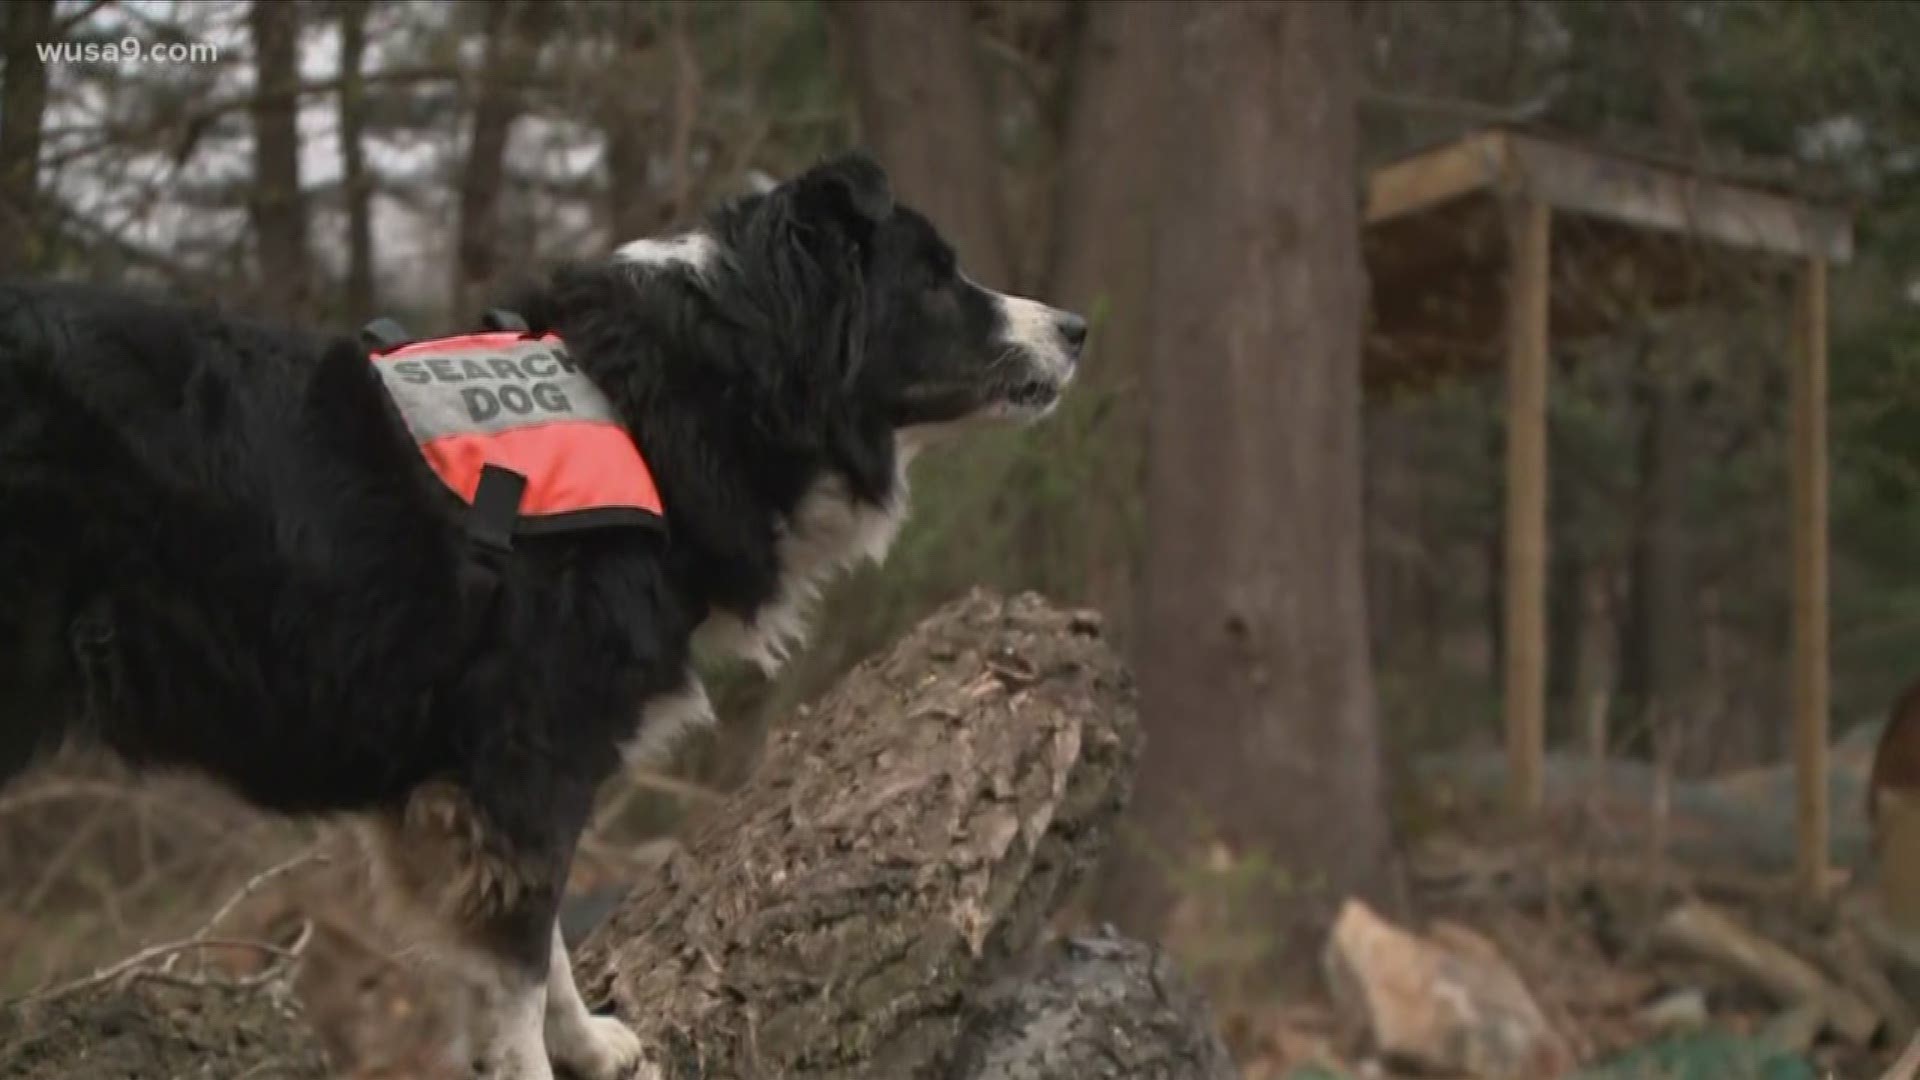 The dogs also search for missing people in areas that have been struck by natural disasters.